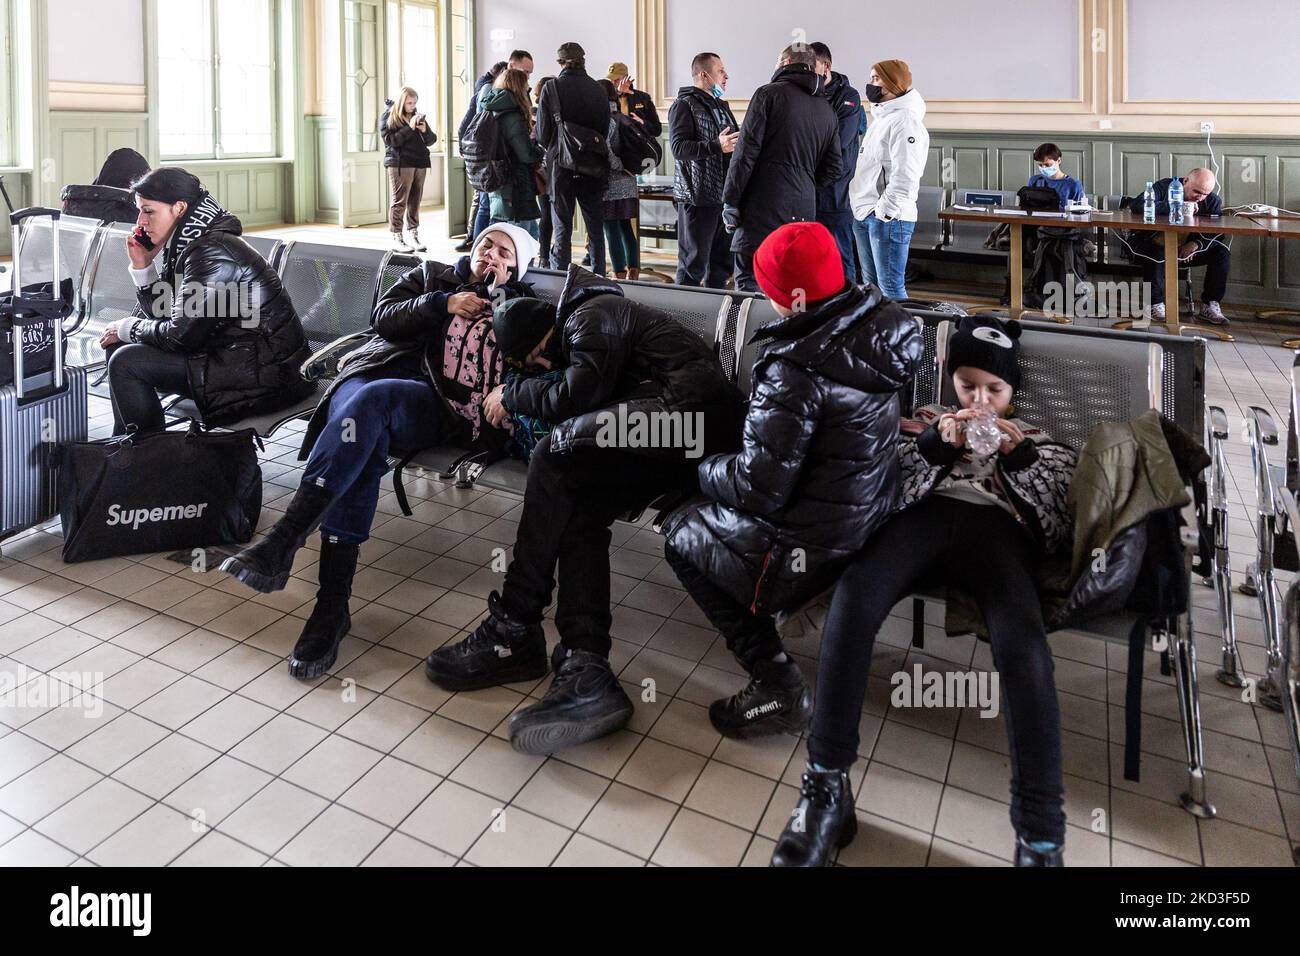 Ukrainian families wait at the railway station in Przemysl as first migrants from Ukraine arrive to Poland after Russia bombarded Ukrainian territory on February 25, 2022. As the Russian Federation army crossed Ukrainian borders the conflict between Ukraine and Russian is expected to force up 5 million Ukrainians to flee. Most of refugees will seek asylum in Poland. Most escapees arrived to border towns like Przemysl and relocate to inner cities. (Photo by Dominika Zarzycka/NurPhoto) Stock Photo